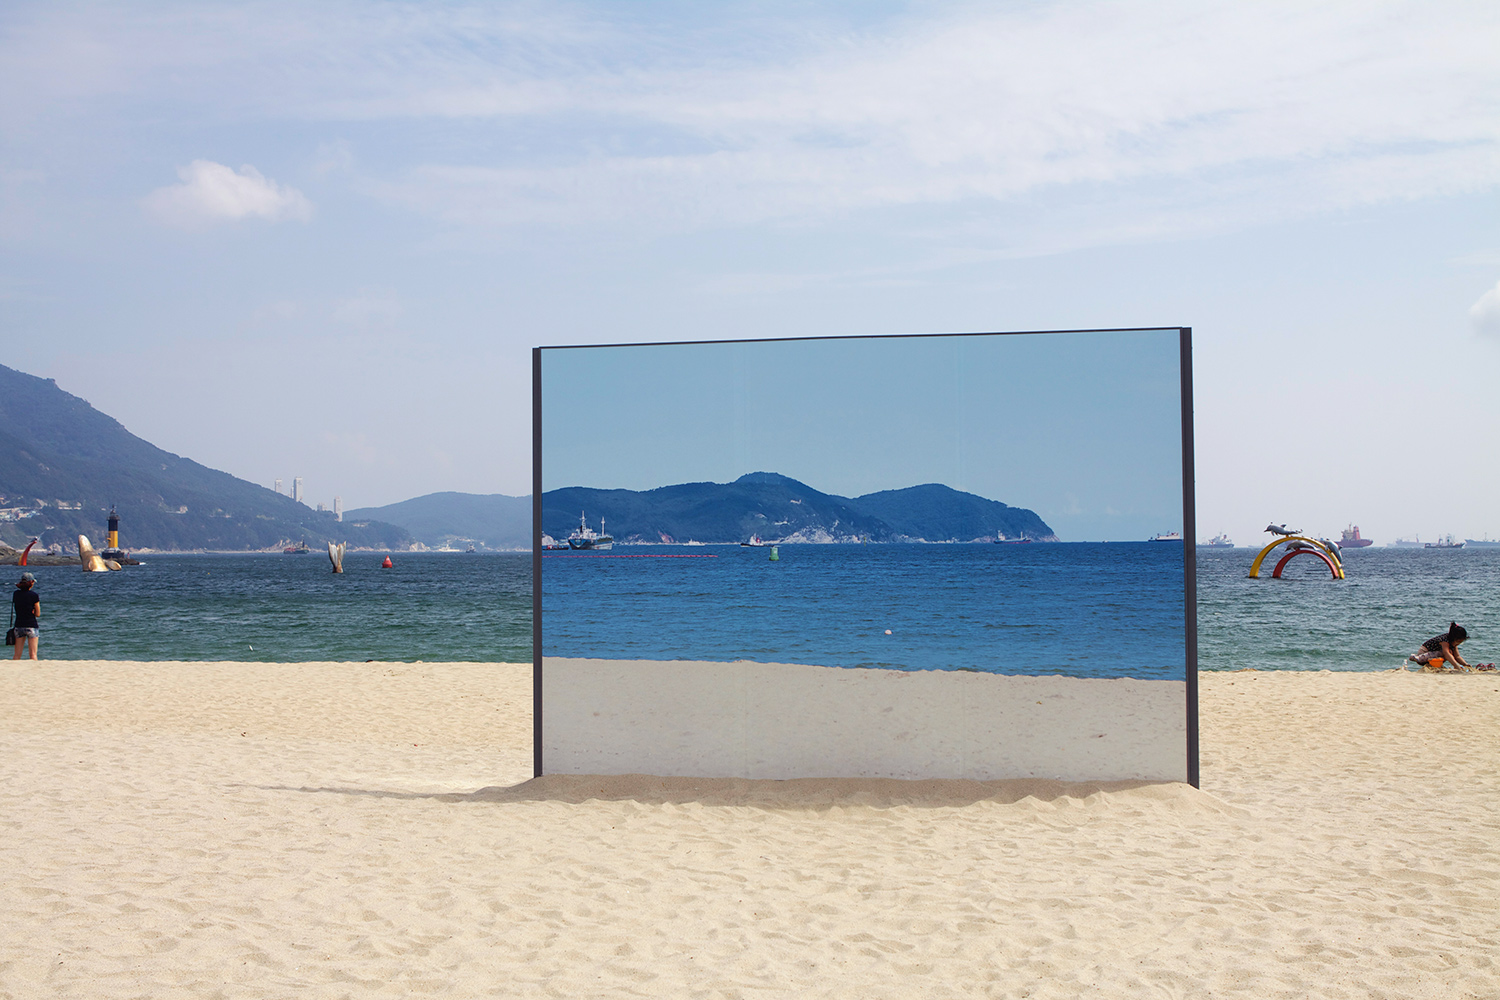   You Are Here, 2013  (image side) Steel, Acrylic, Vinyl Print, 8'x 12'    This was a public art installation created in collaboration with Che Yeon Park. The piece was part of the Sea Art Festival Busan Biennale in Busan, South Korea. It is an explo